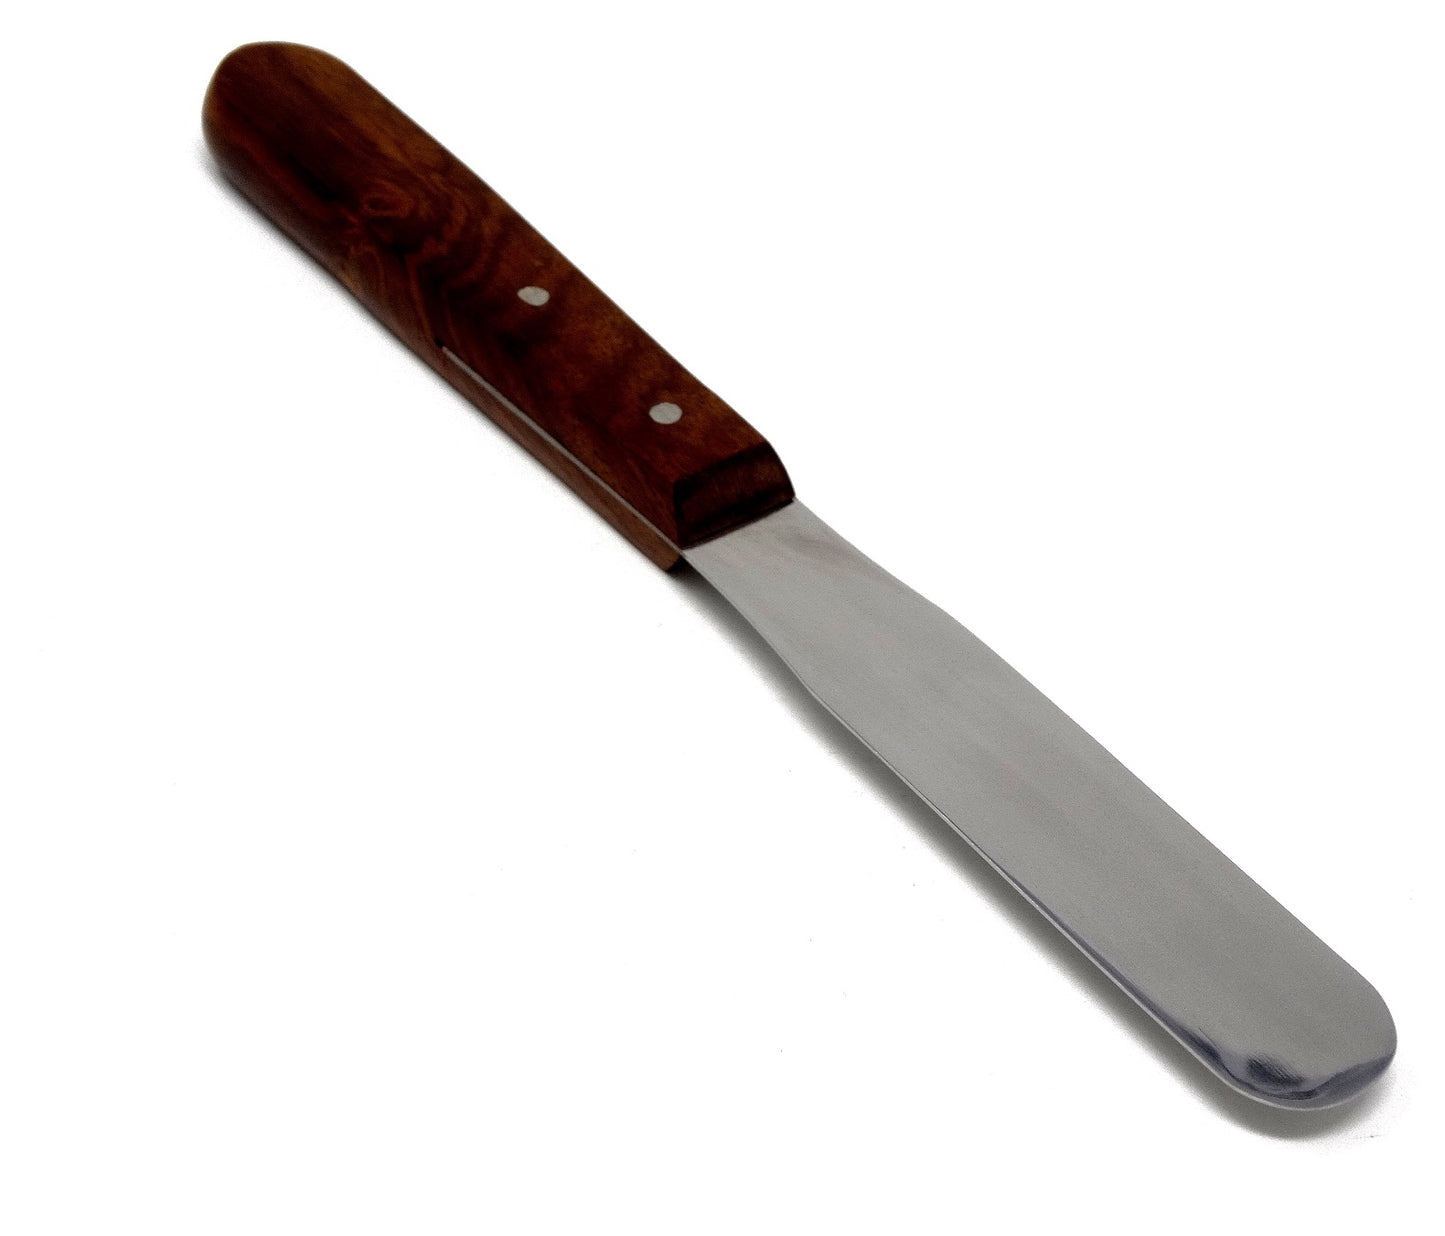 IMS-WHS6 Stainless Steel Lab Spatula with Wooden Handle, 6" Blade, 1" Blade Width, 10.4" Total Length